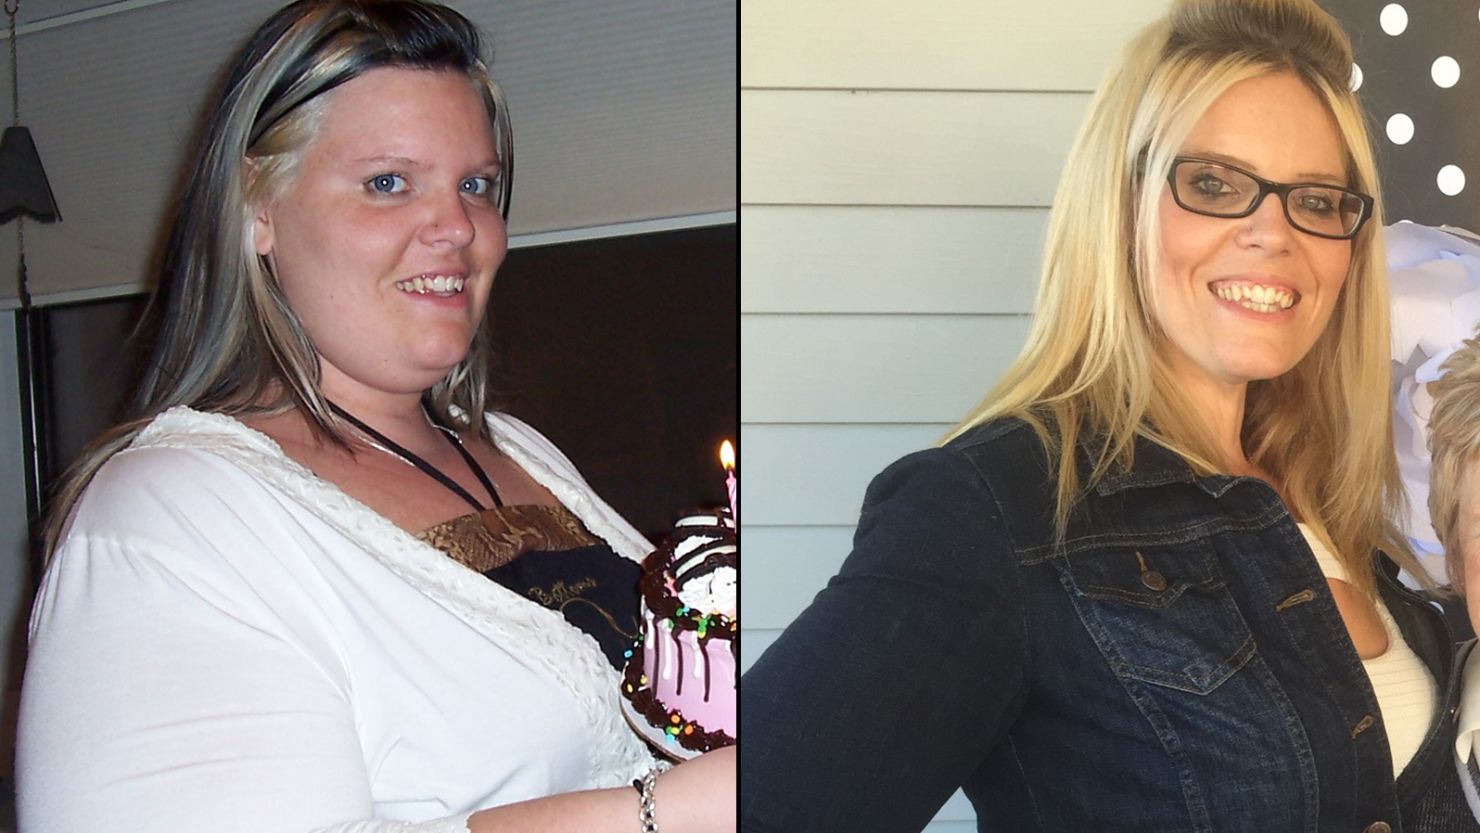 Joanna Pearson was 410 pounds at her heaviest. She lost weight through diet and exercise.